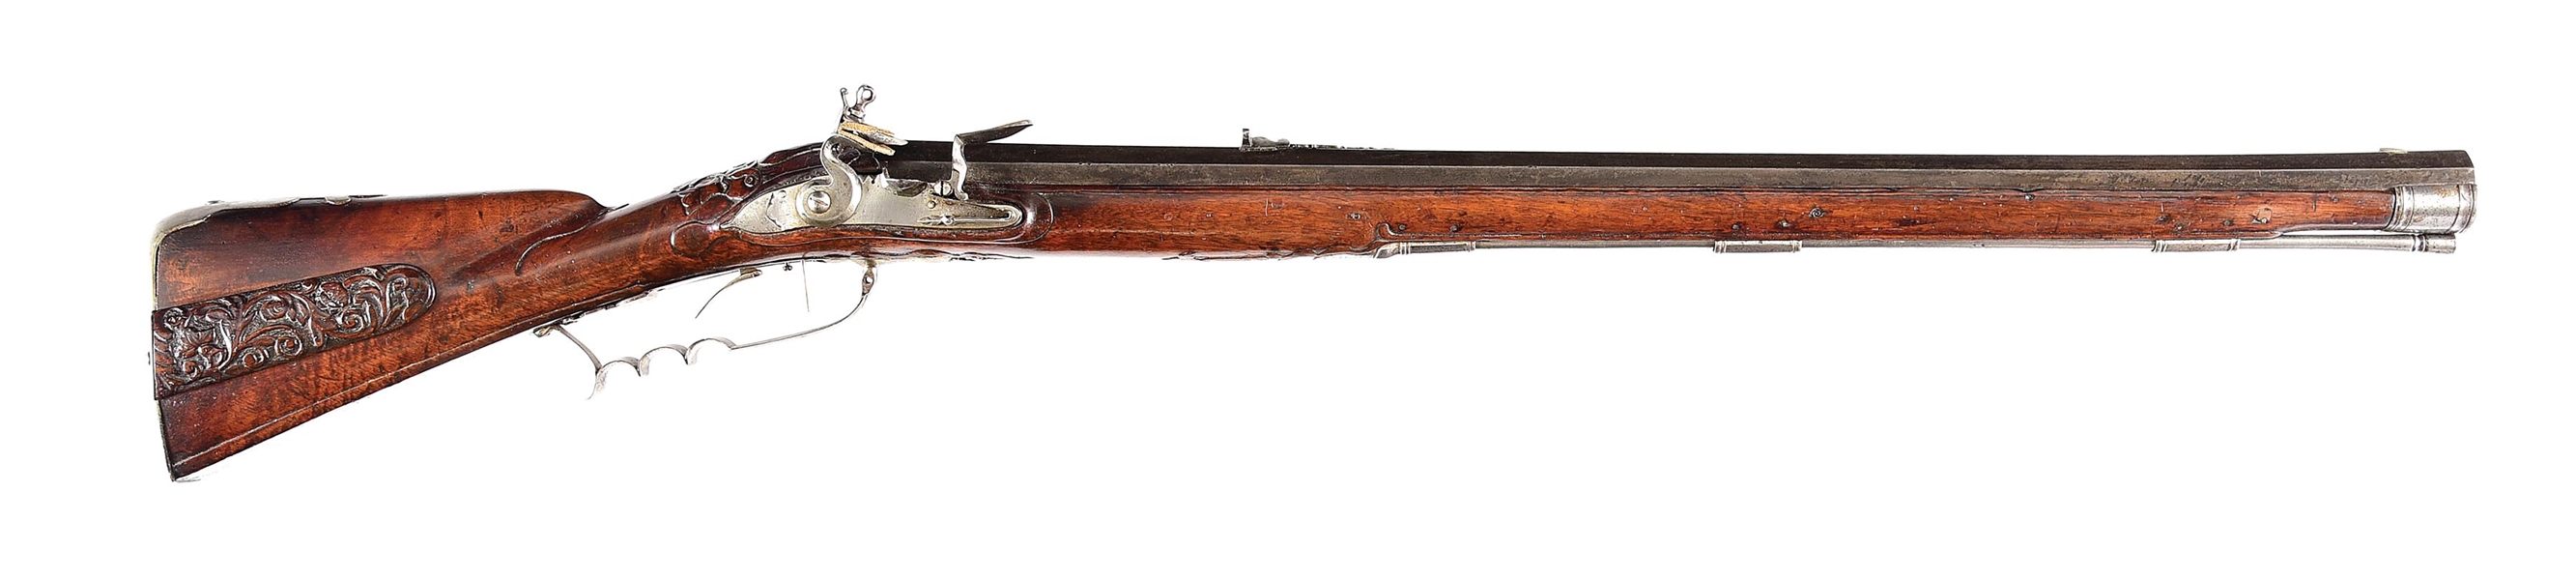 (A) A HIGHLY DECORATED AND GARGANTUAN JAEGER RIFLE SIGNED AND DATED 1727, PROBABLY USED AS AN EARLY MATCH RIFLE.